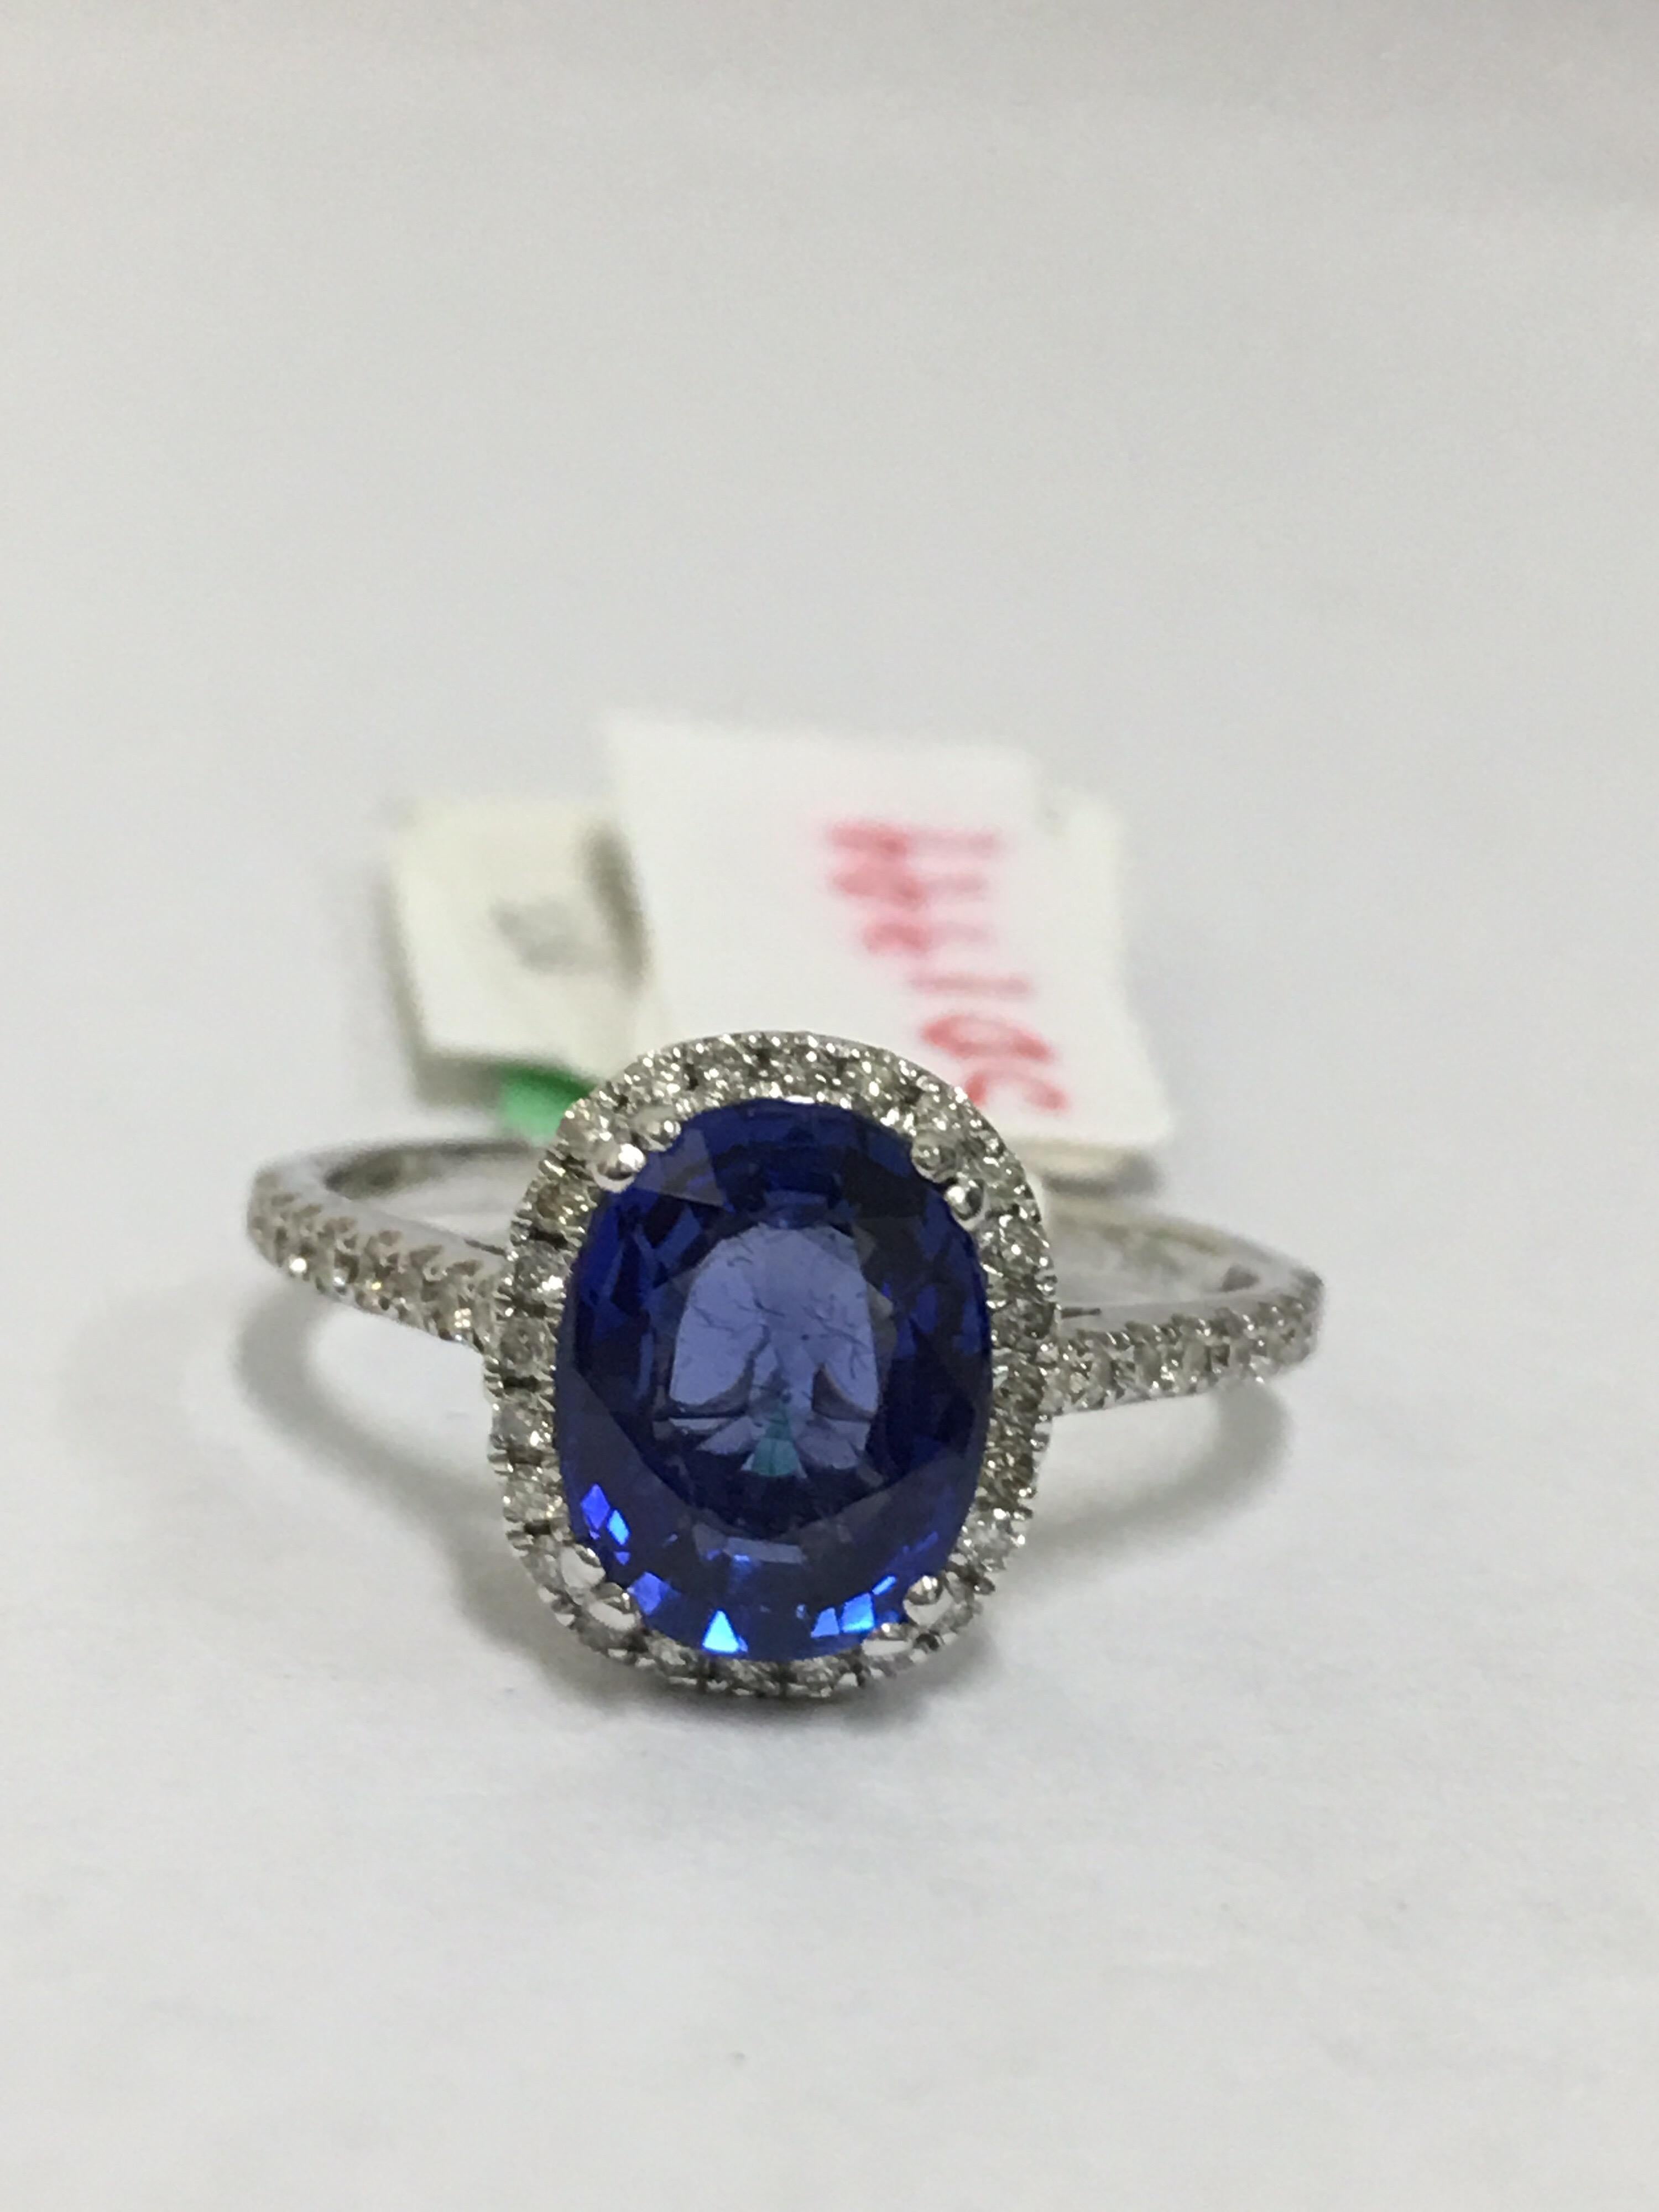 Blue sapphire with diamonds set in 14 Karat white Gold.
Sapphire weight is 2.48 Carat.
Diamonds halo are 0.29 all matched stones.